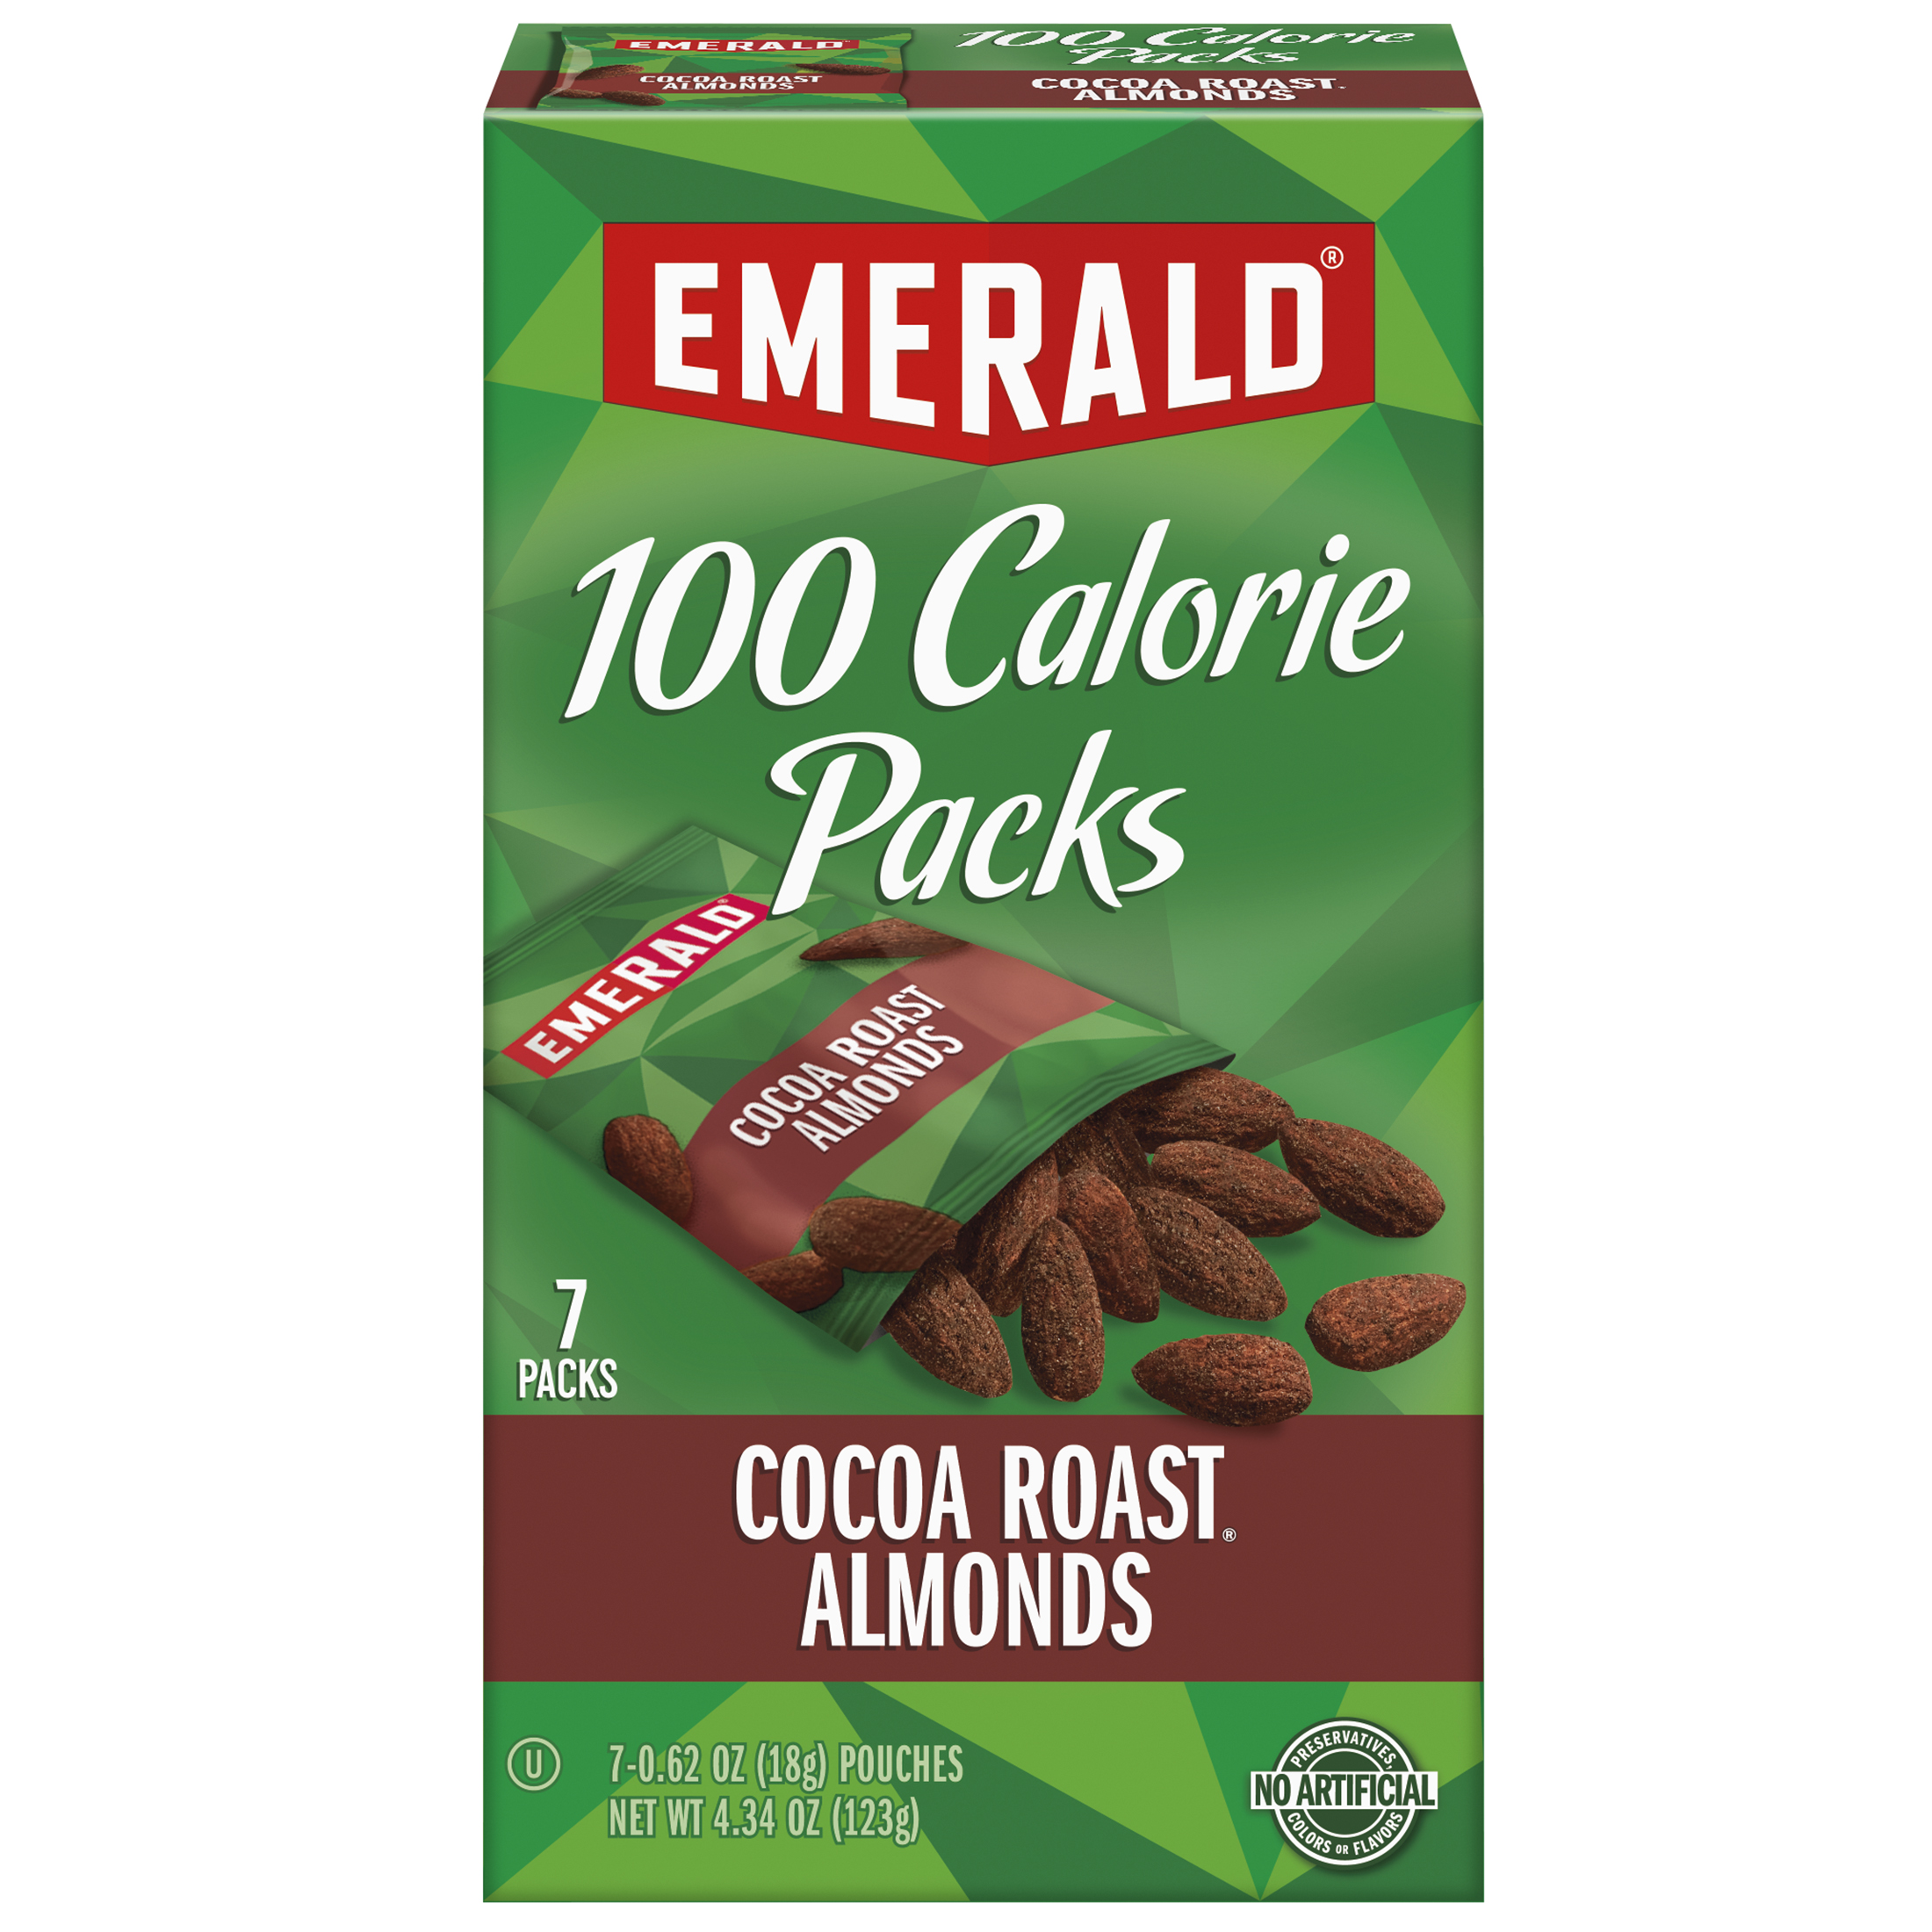 Emerald Nuts Cocoa Roast Almonds, 100 Calorie Packs, 7 Count, 4.34 oz - image 2 of 6